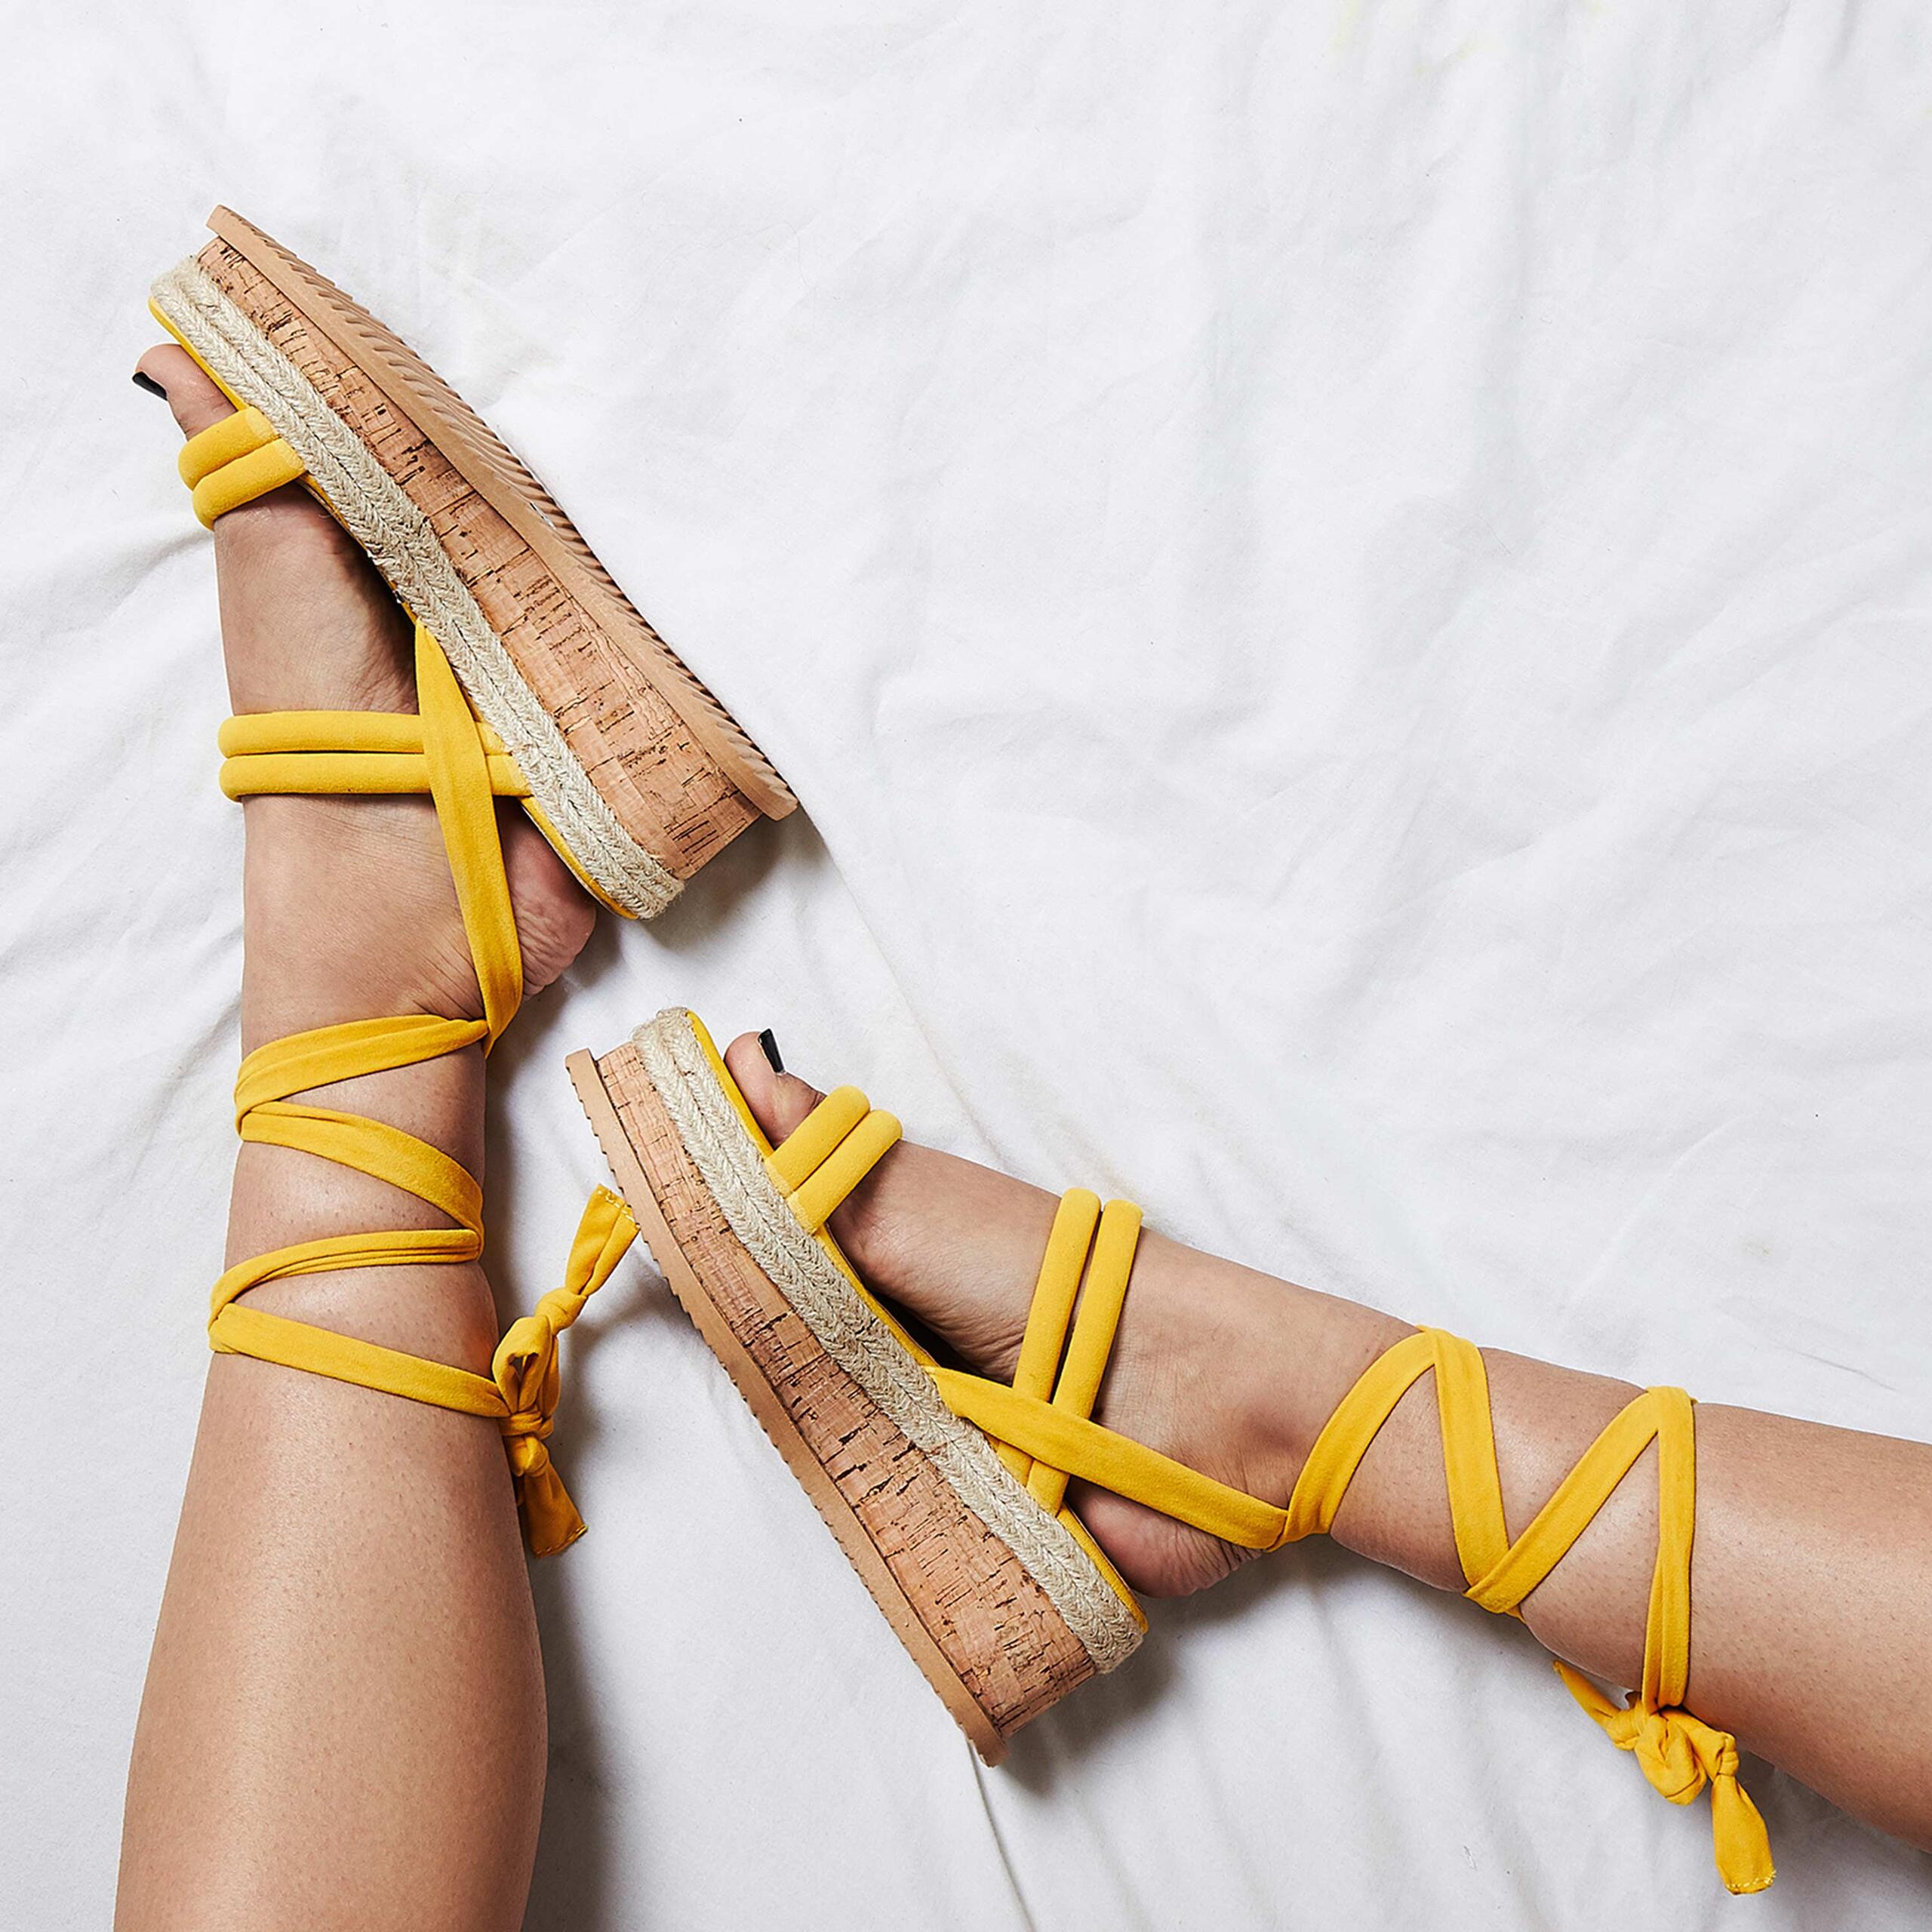 An image of a pair of summer shoes which are the Whisper lace up espadrille